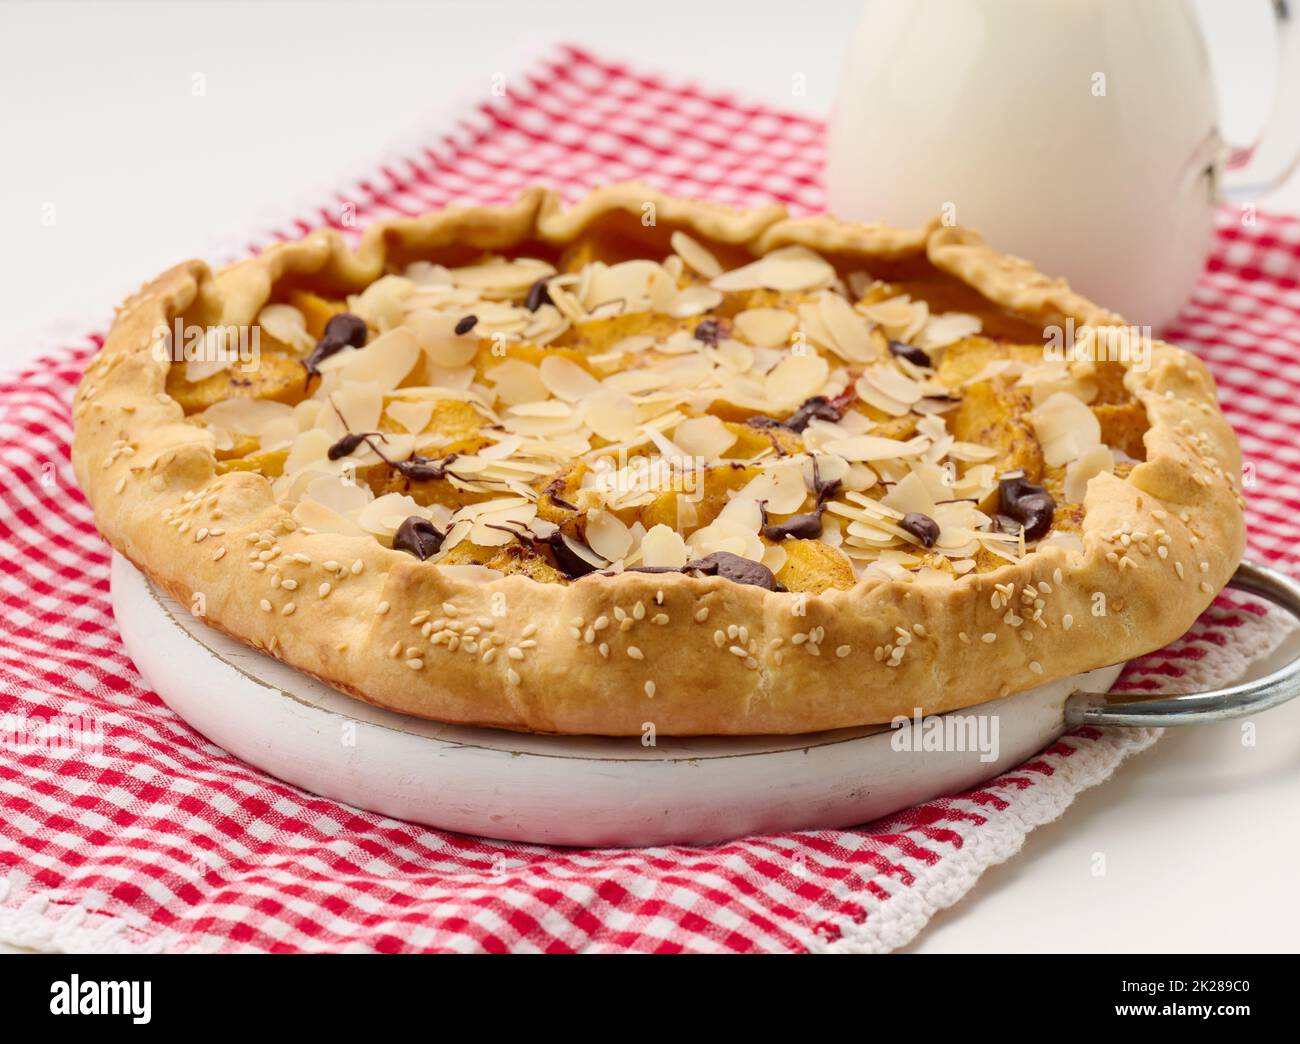 baked round pie with apple pieces, sprinkled with almond flakes on a white table Stock Photo